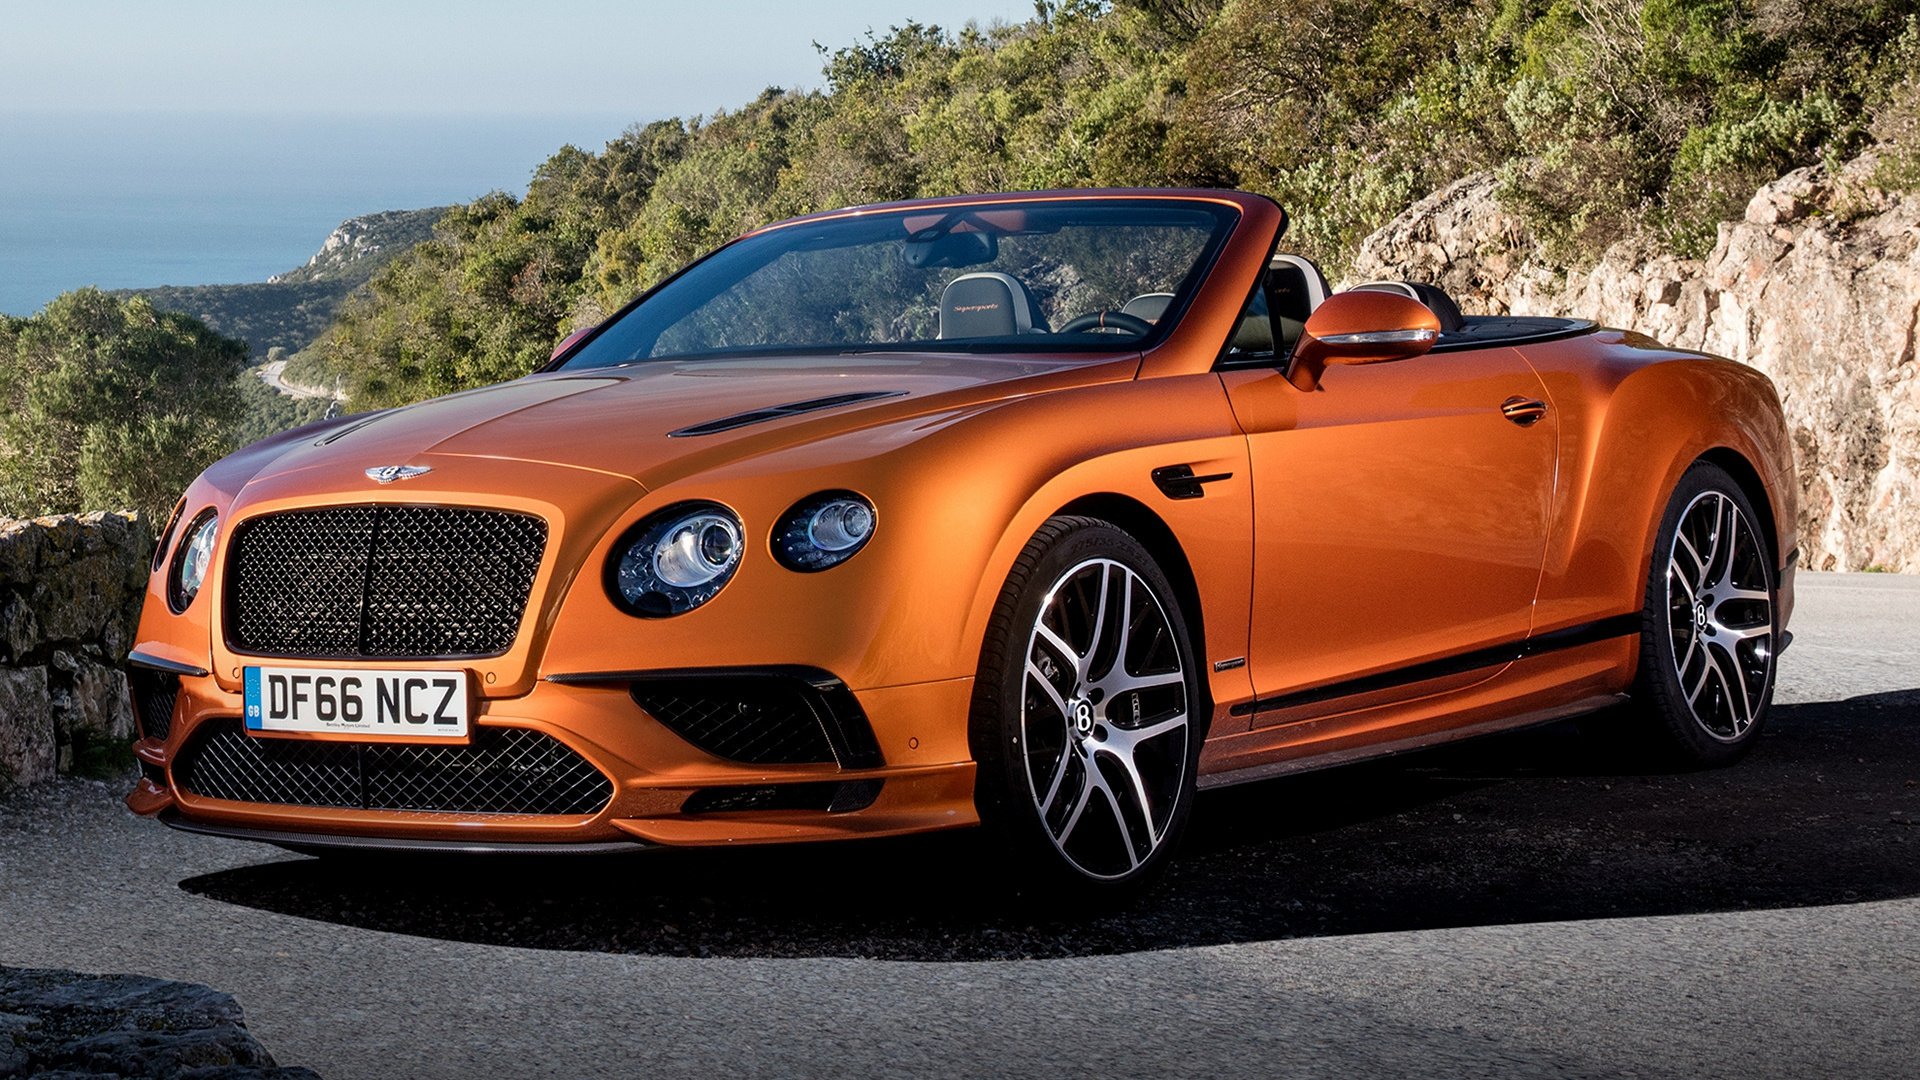 2017 Bentley Continental Supersports Convertible Hd Wallpaper Background Image 1920x1080